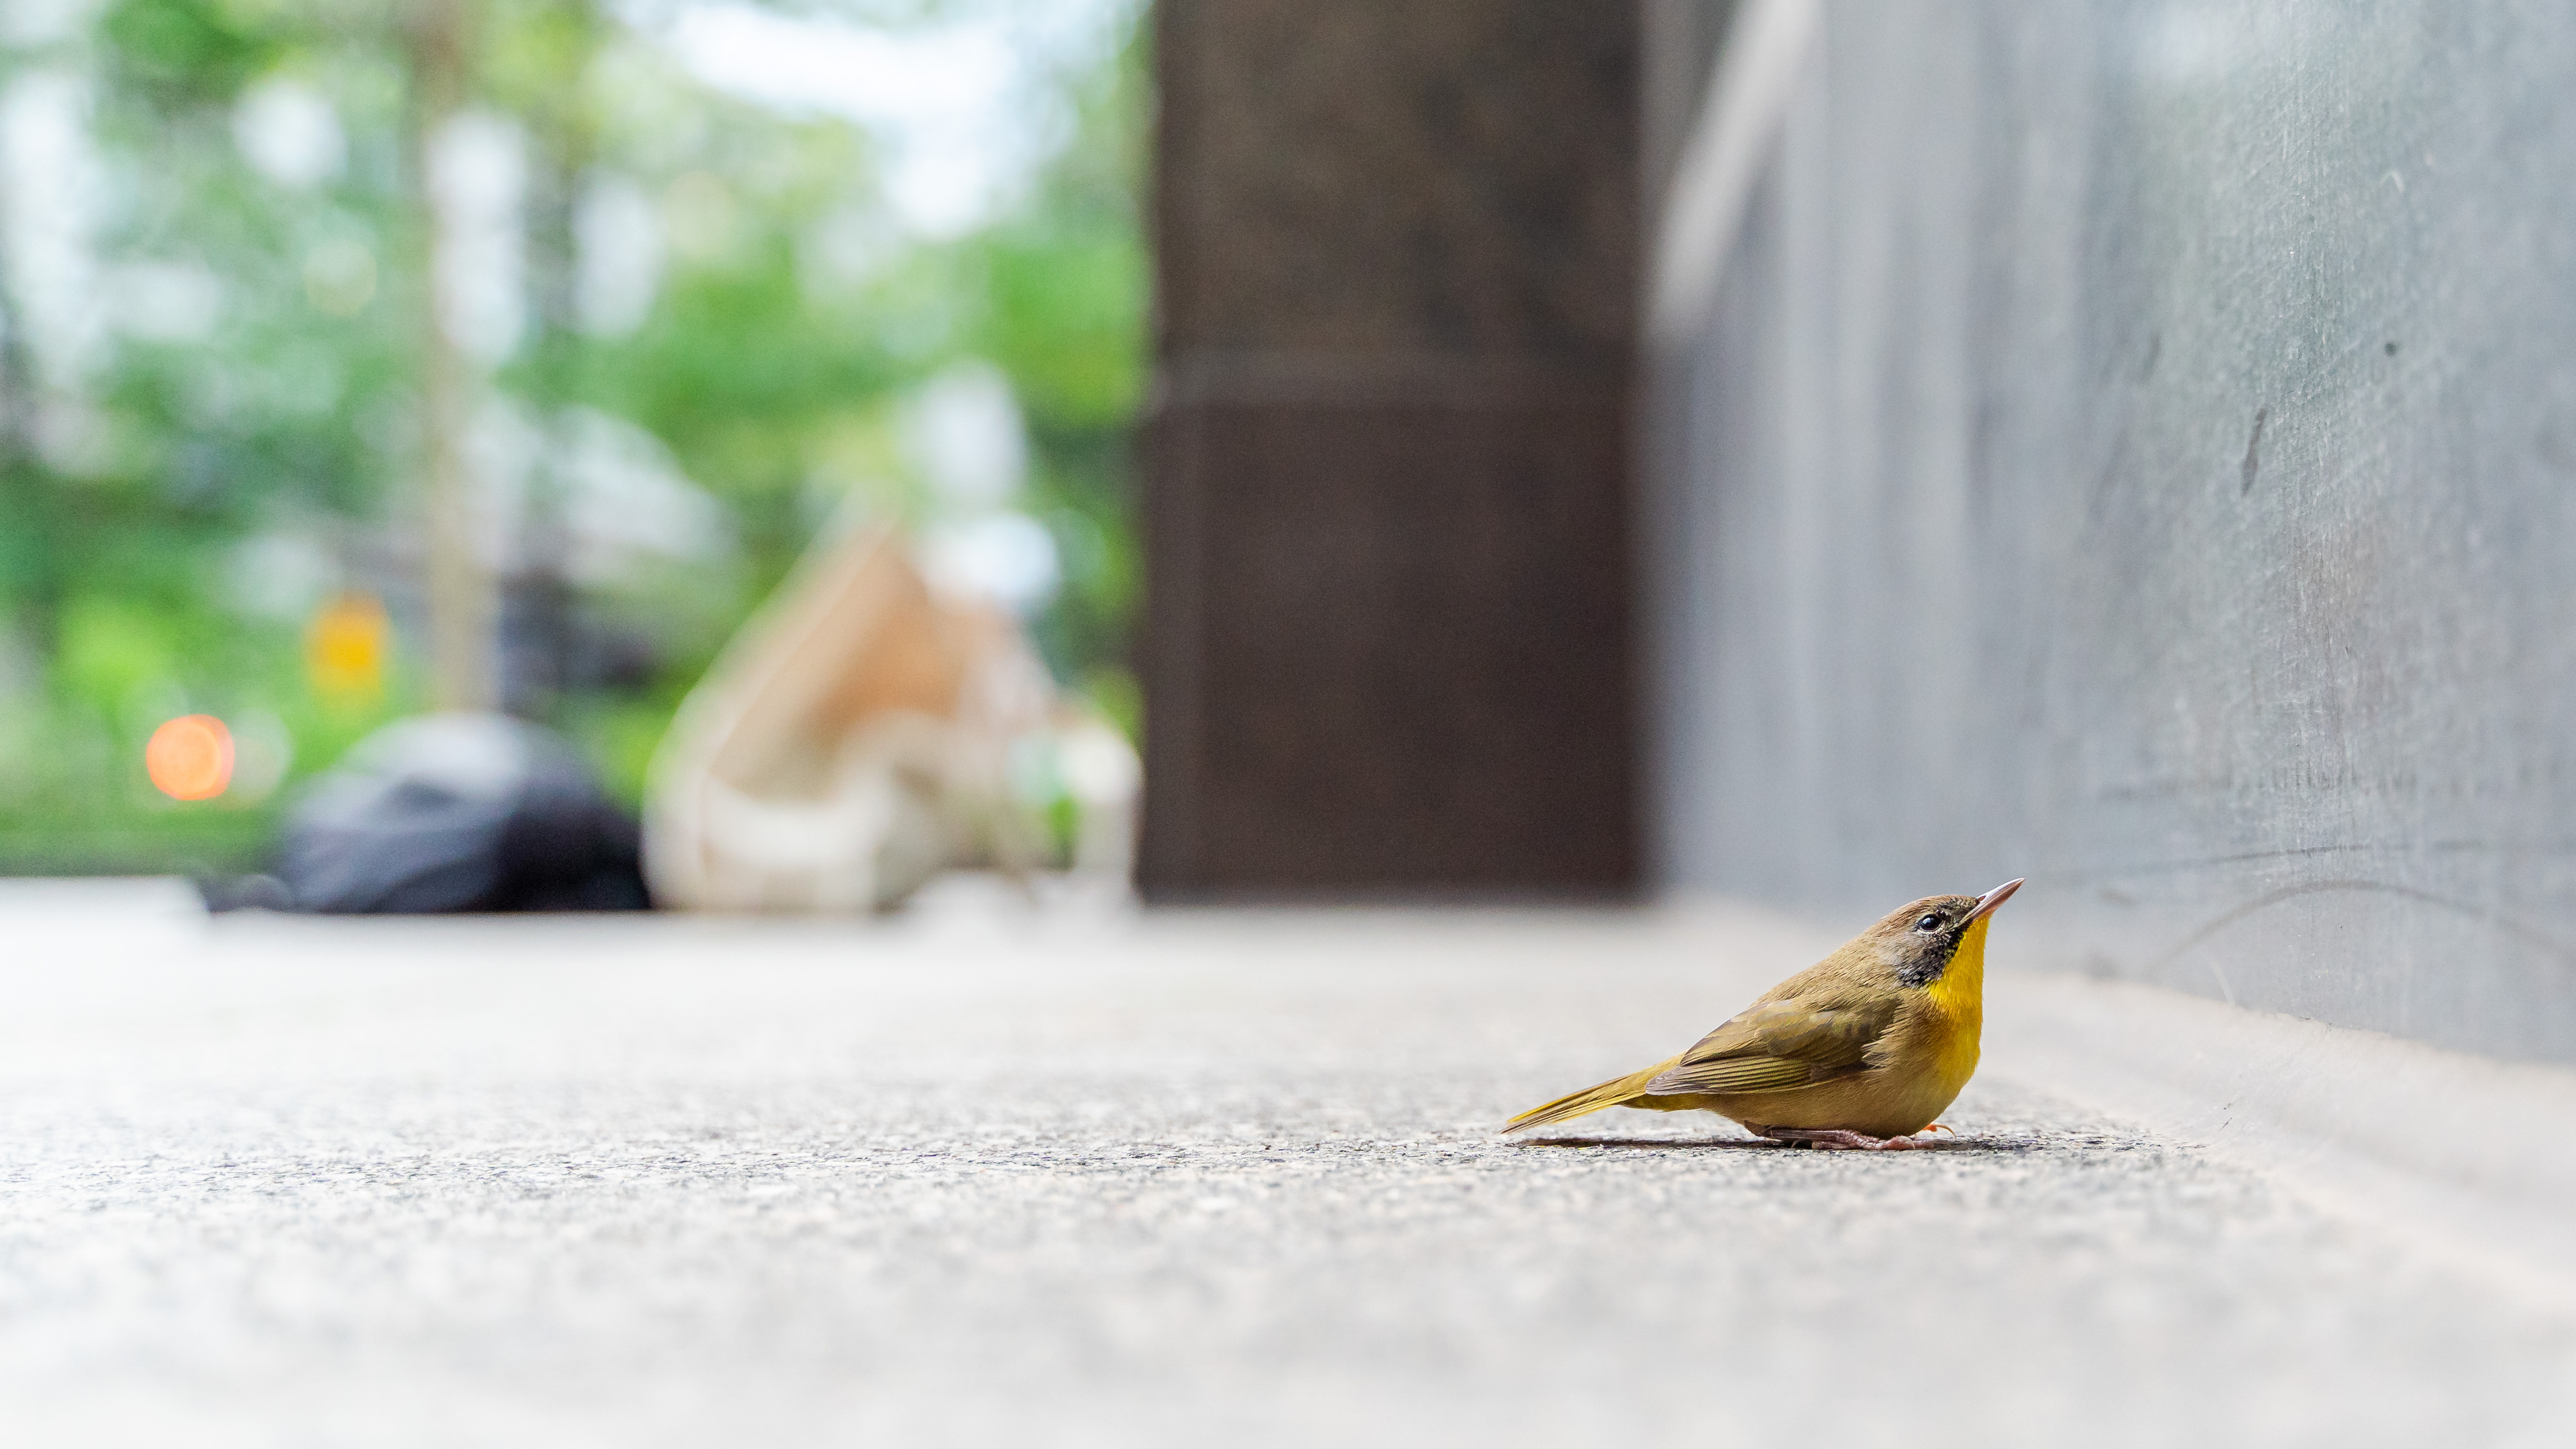 A stunned Common Yellowthroat lifelessly faces the wall. Many stunned collision victims lose the coordination and strength to resume flight and instead remain motionless and vulnerable for up to hours. Photo by Winston Qin.